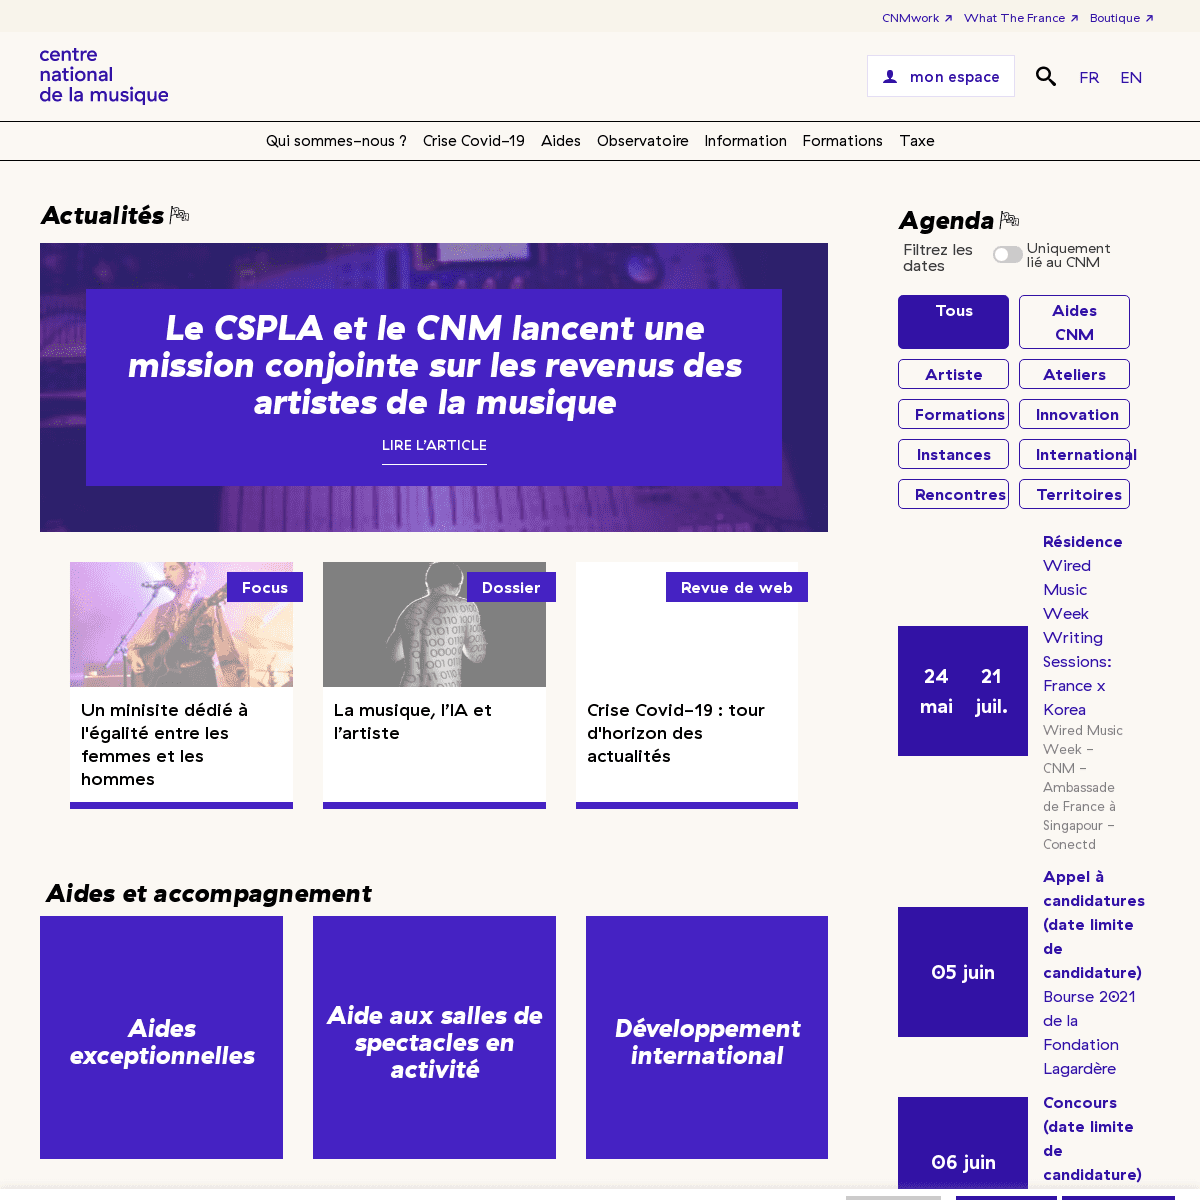 A complete backup of https://cnm.fr